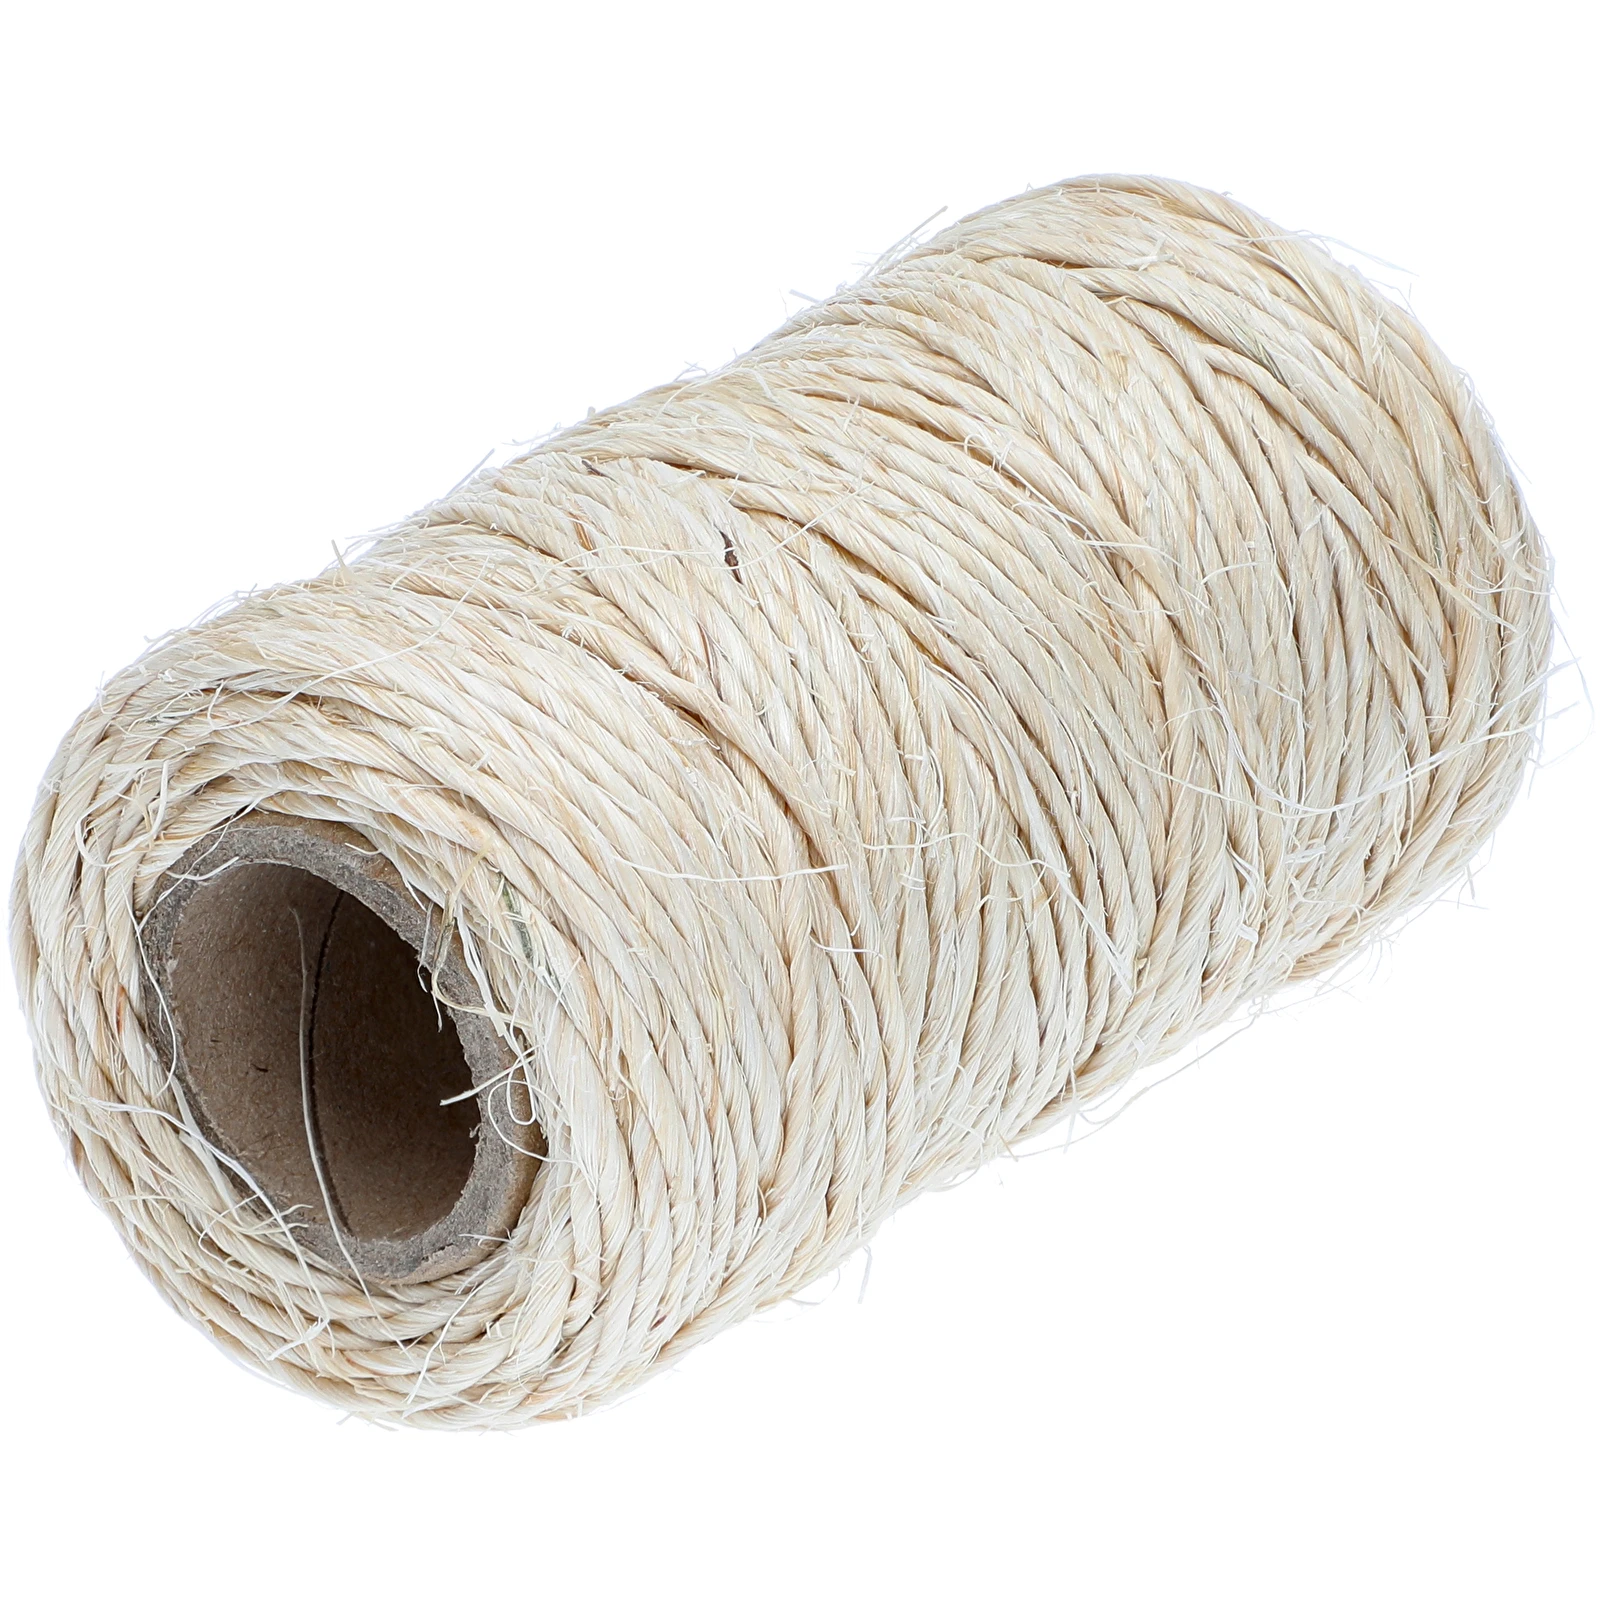 Sisal rope made of 100% sisal fibers: durable & tough. Quick delivery-  PolyRopes